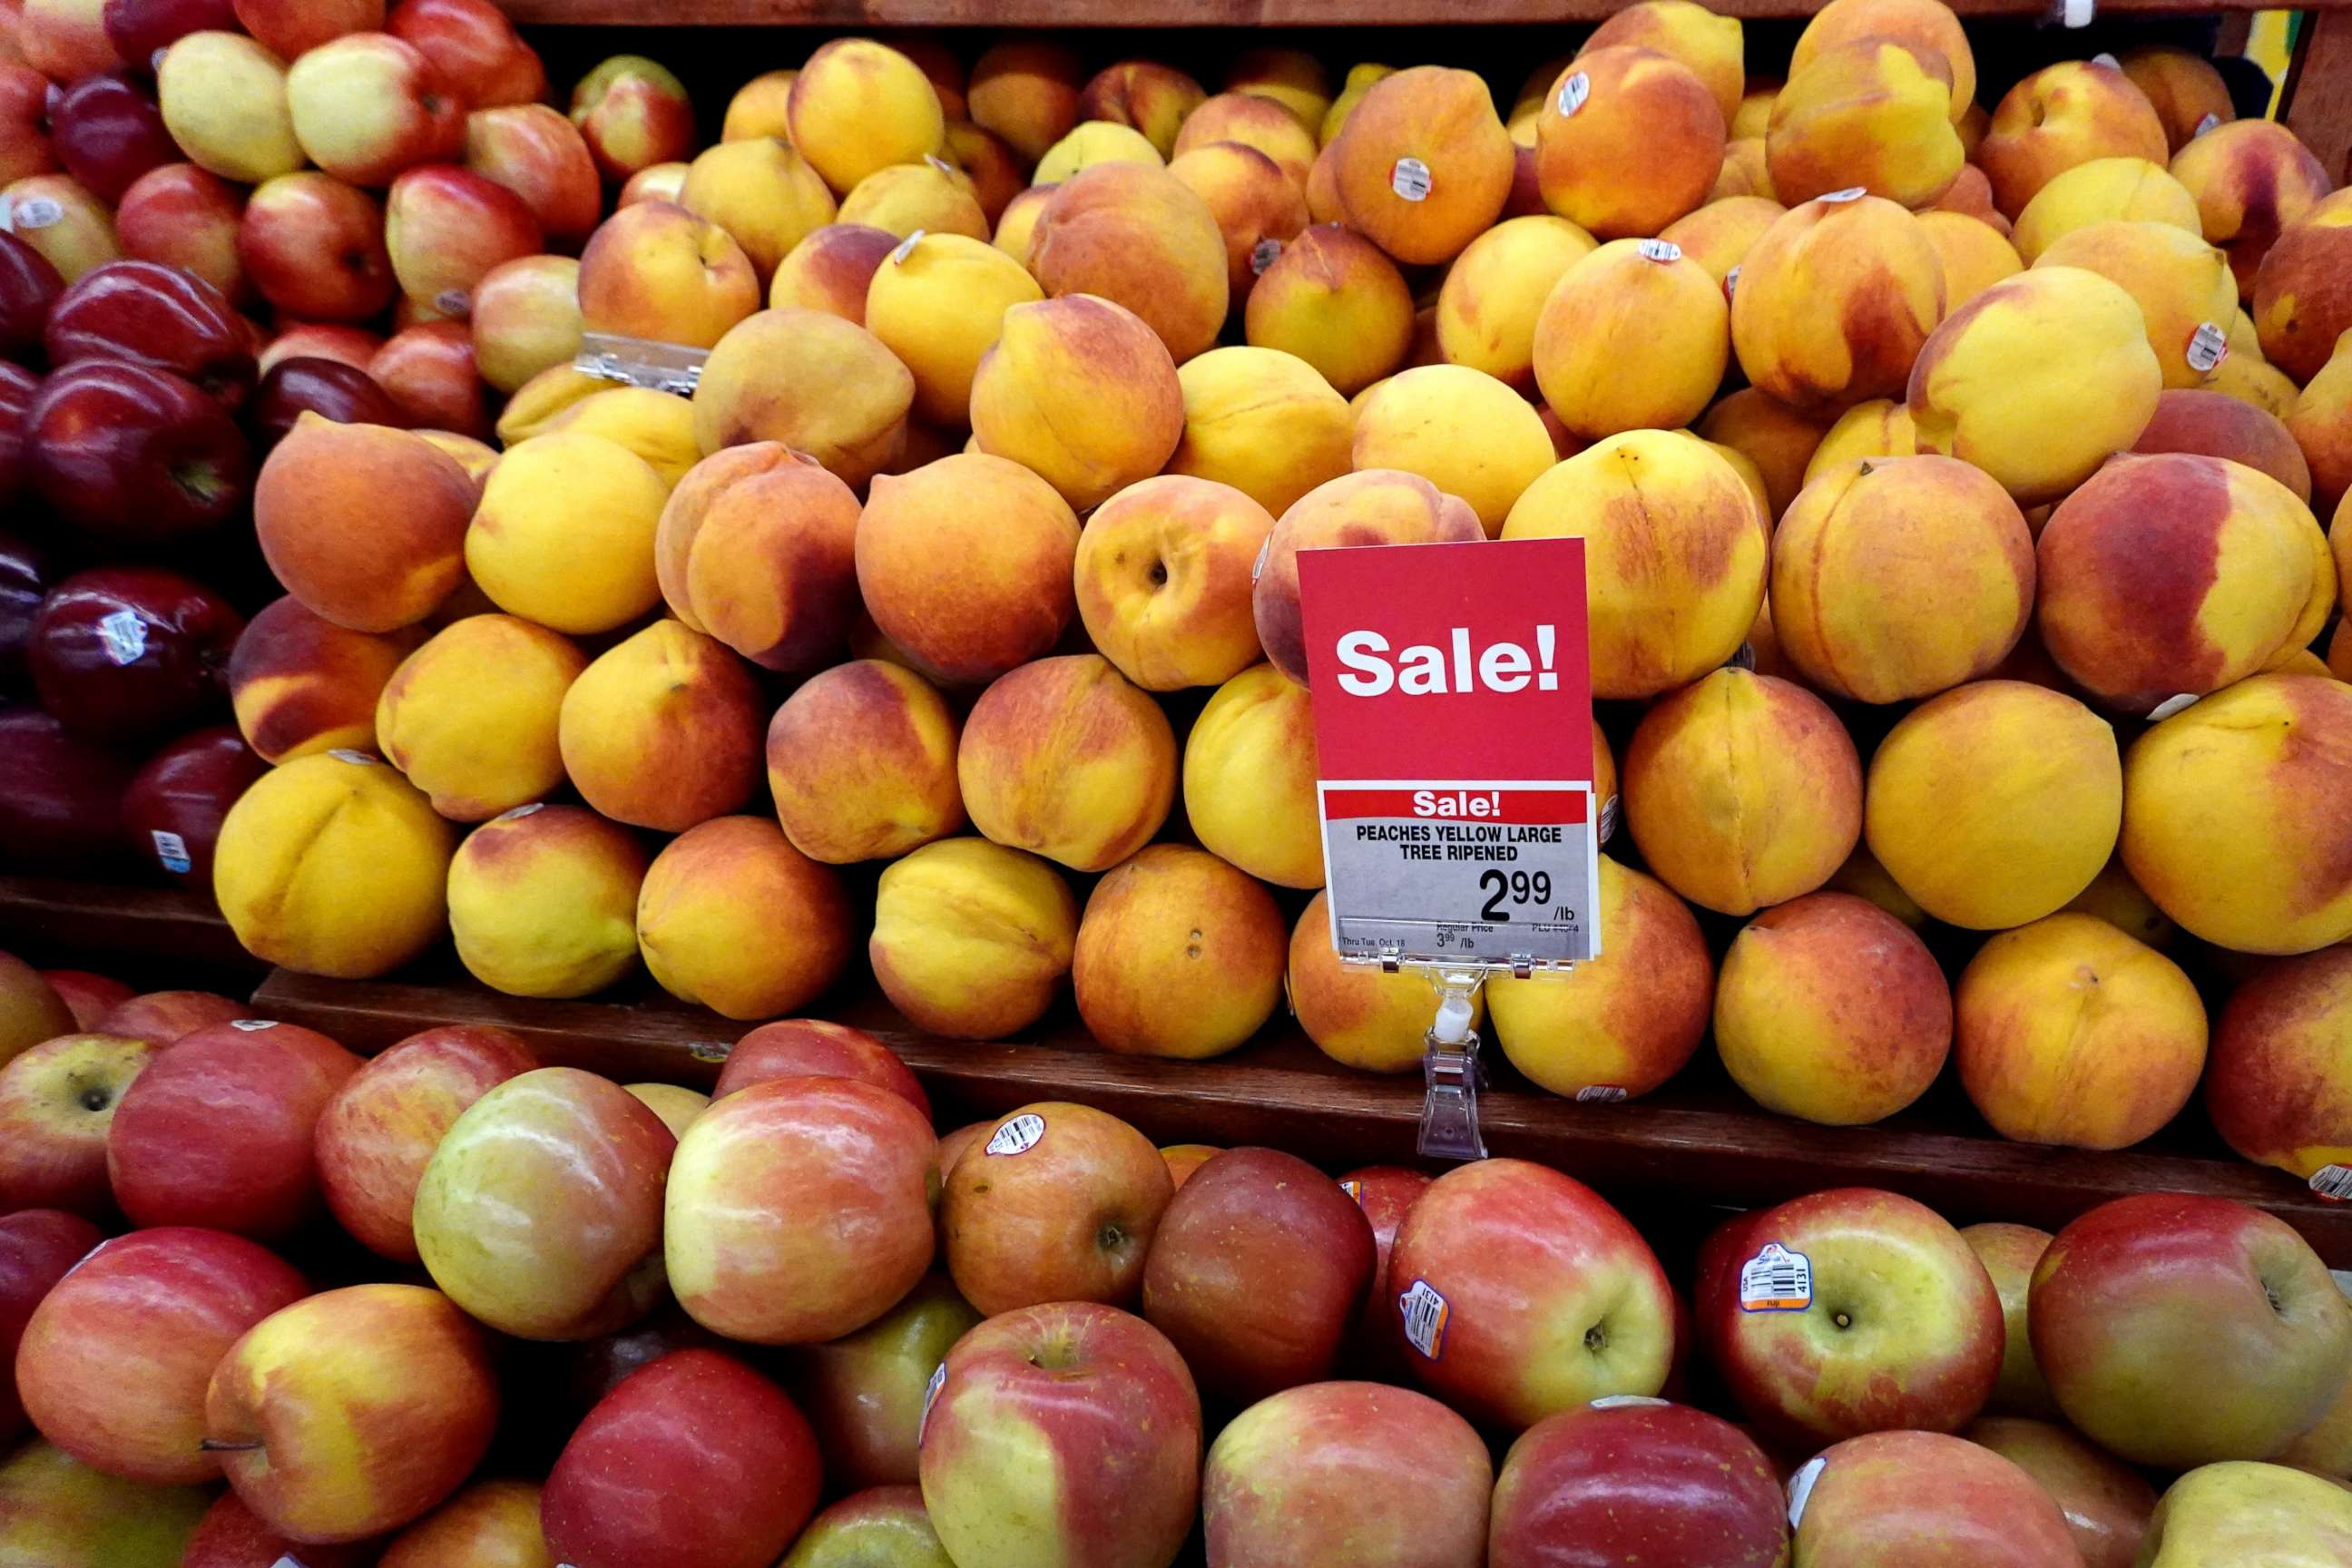 PHOTO: Produce is offered for sale at a grocery store on Oct. 13, 2022, in Chicago, Illinois.